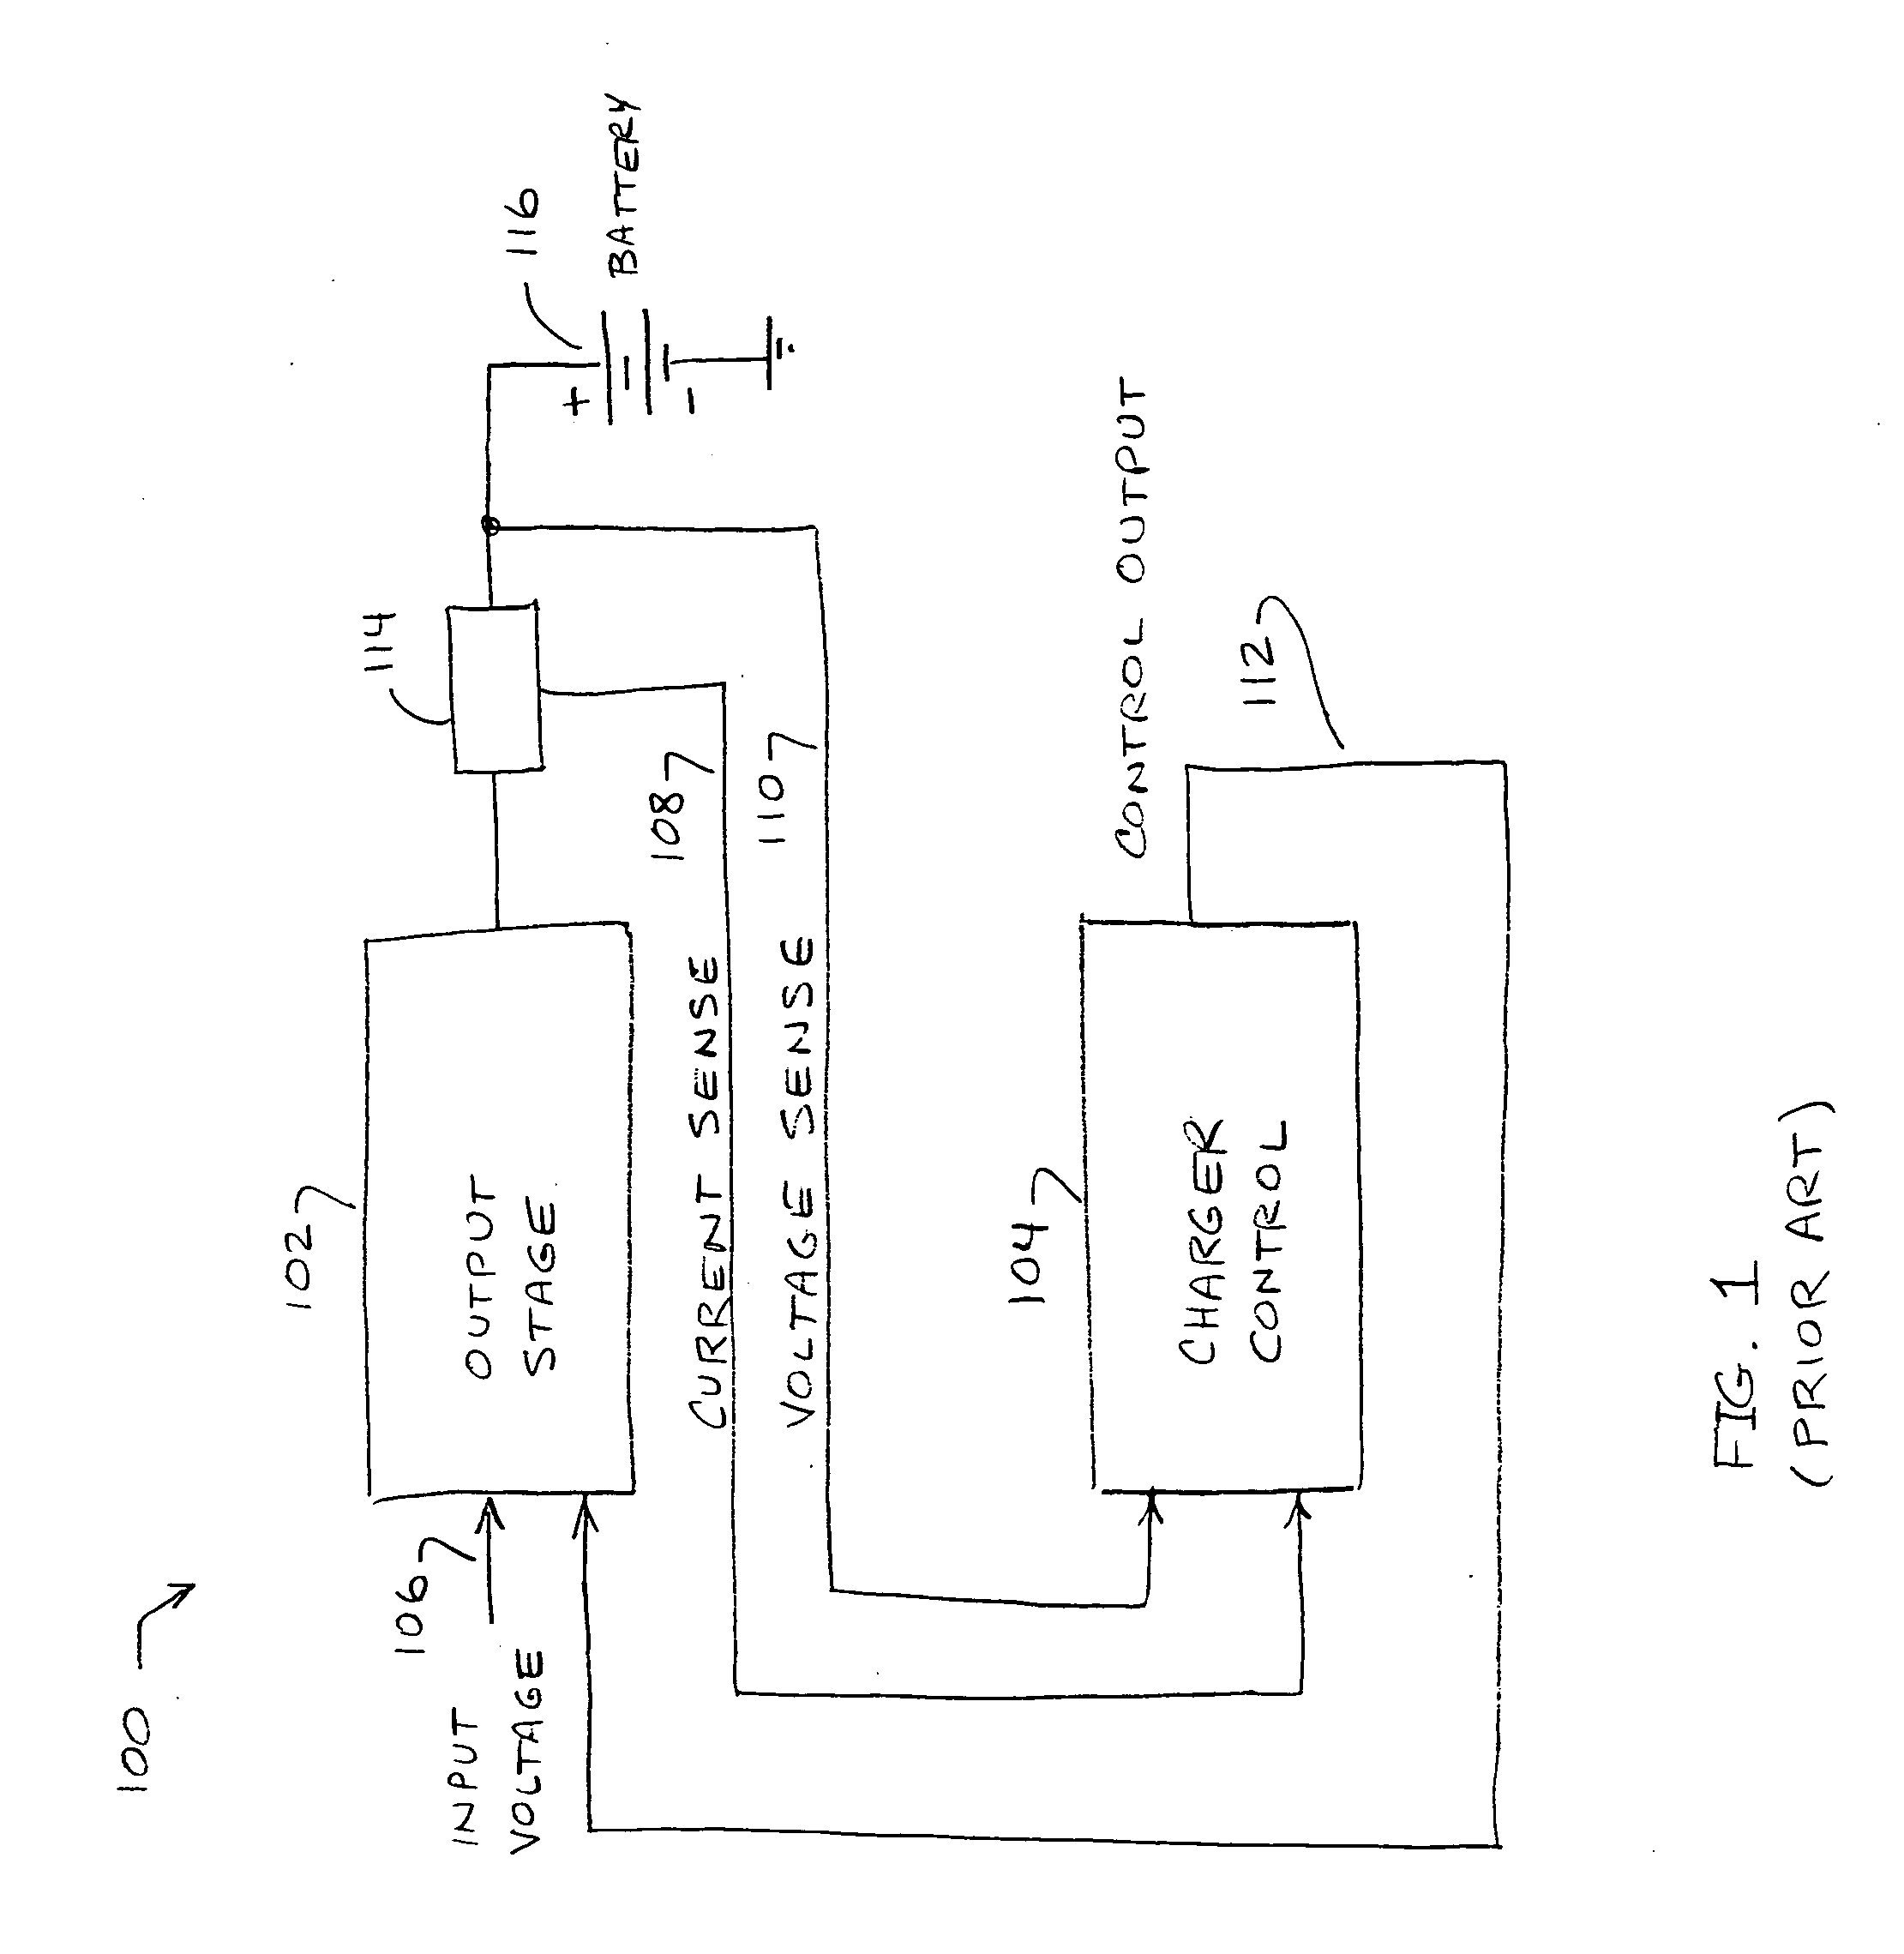 Area-efficient compensation circuit and method for voltage mode switching battery charger